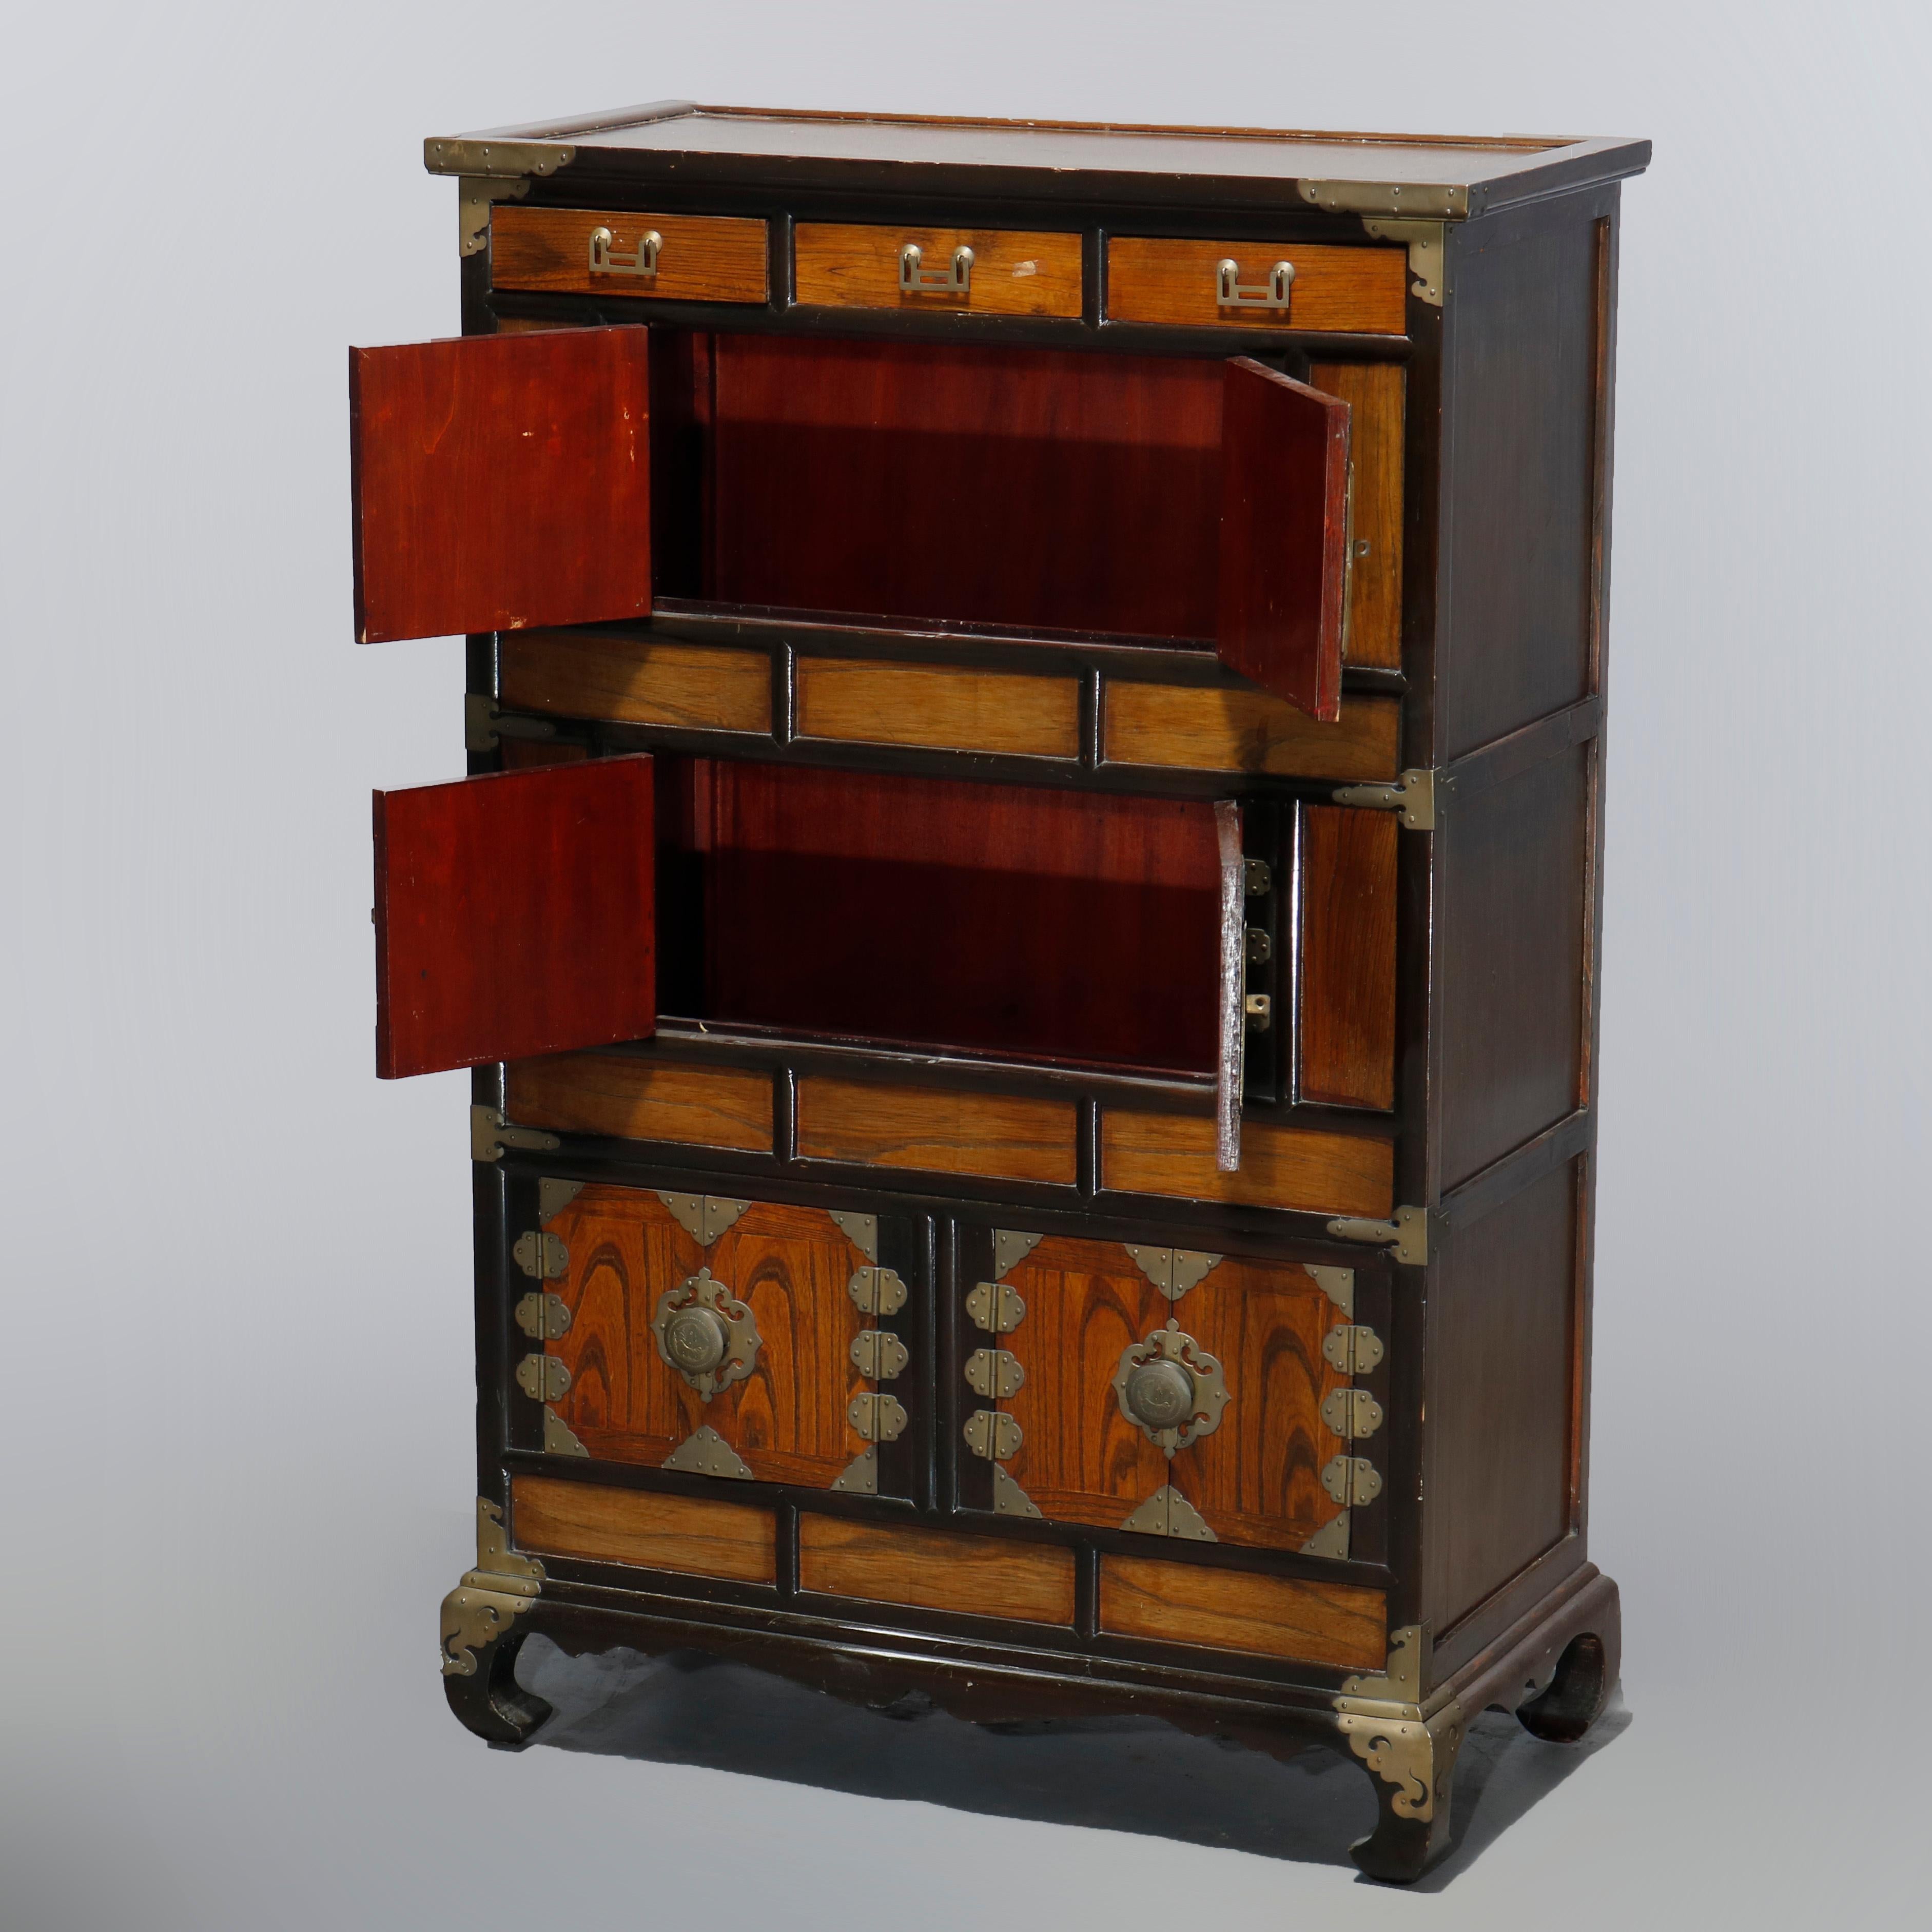 An antique Asian cabinet offers mixed wood construction with multiple drawers and cabinets having brass hinges and hardware throughout, raise on scroll feet, 20th century

Measures: 40.5